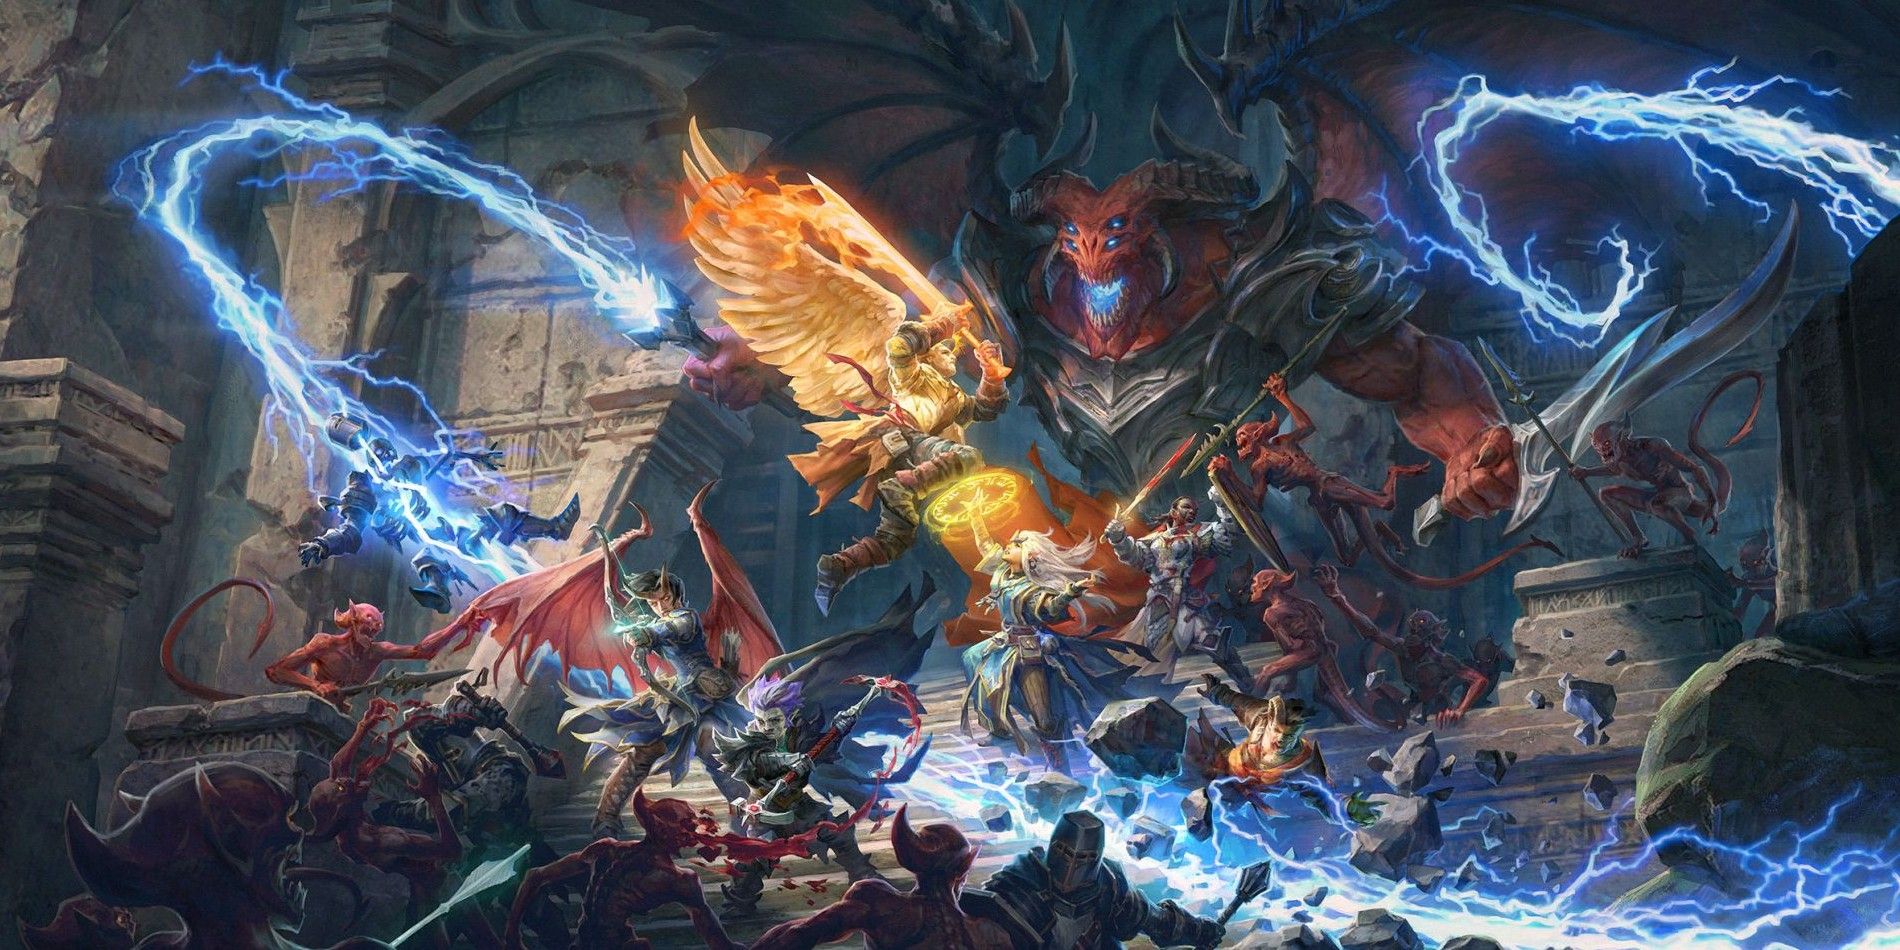 pathfinder dragon faces off against players with bows, magic and other weapons